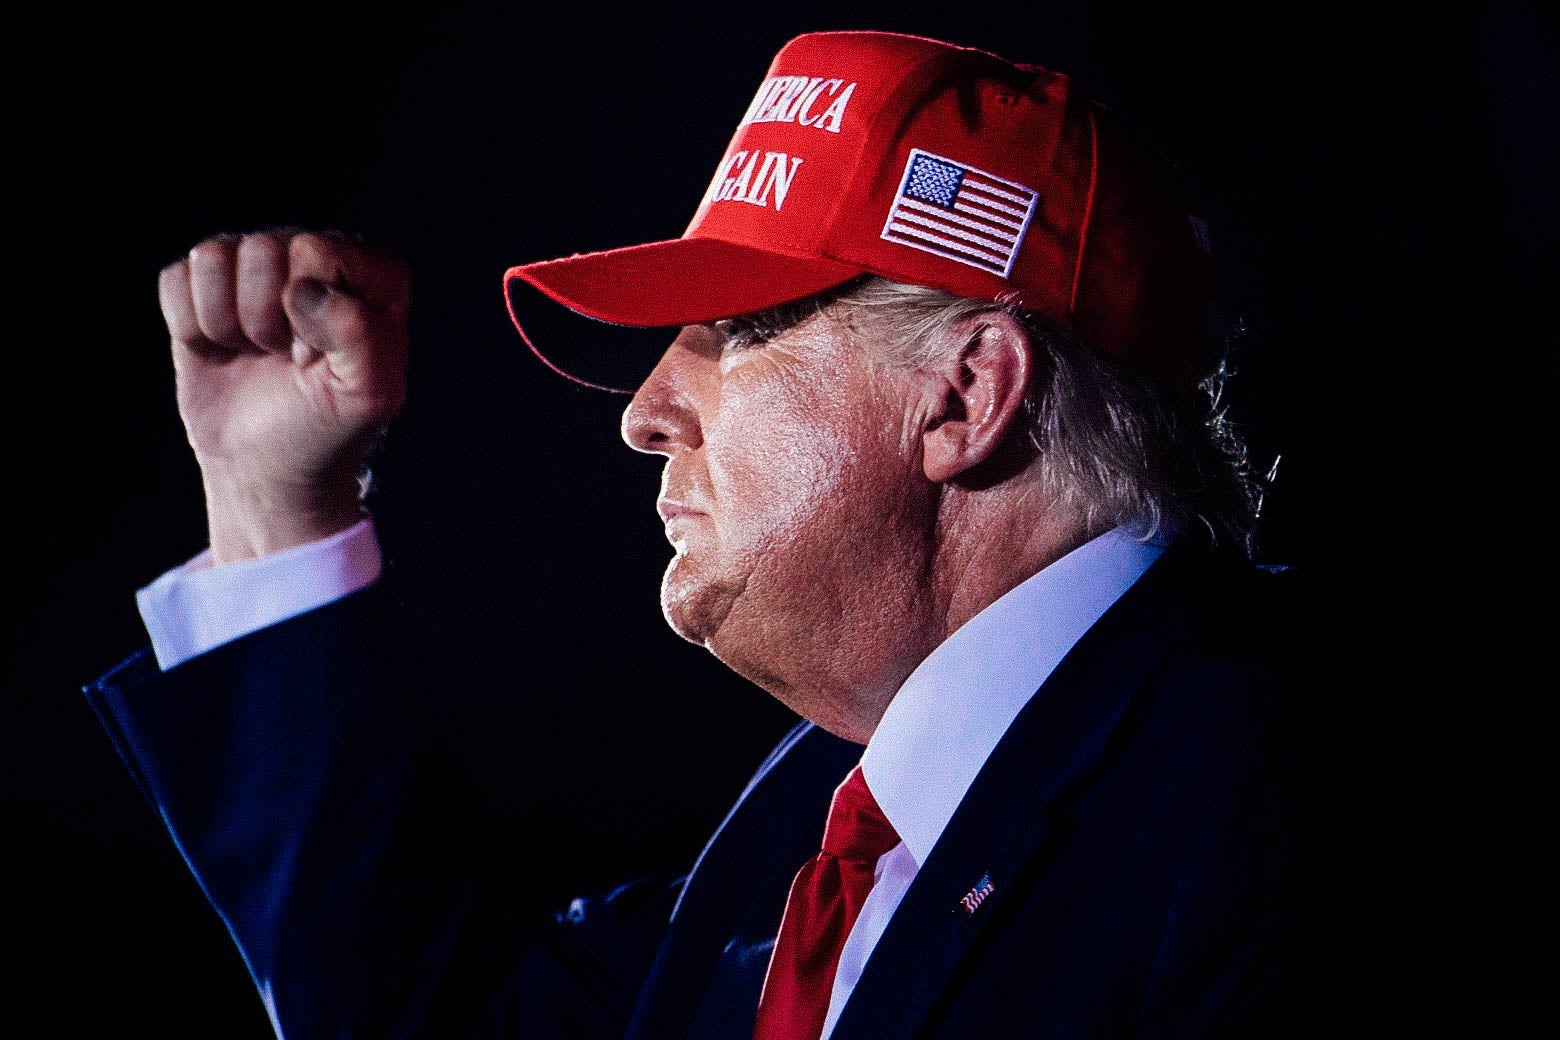 Trump in profile, wearing a red MAGA hat and raising his fist